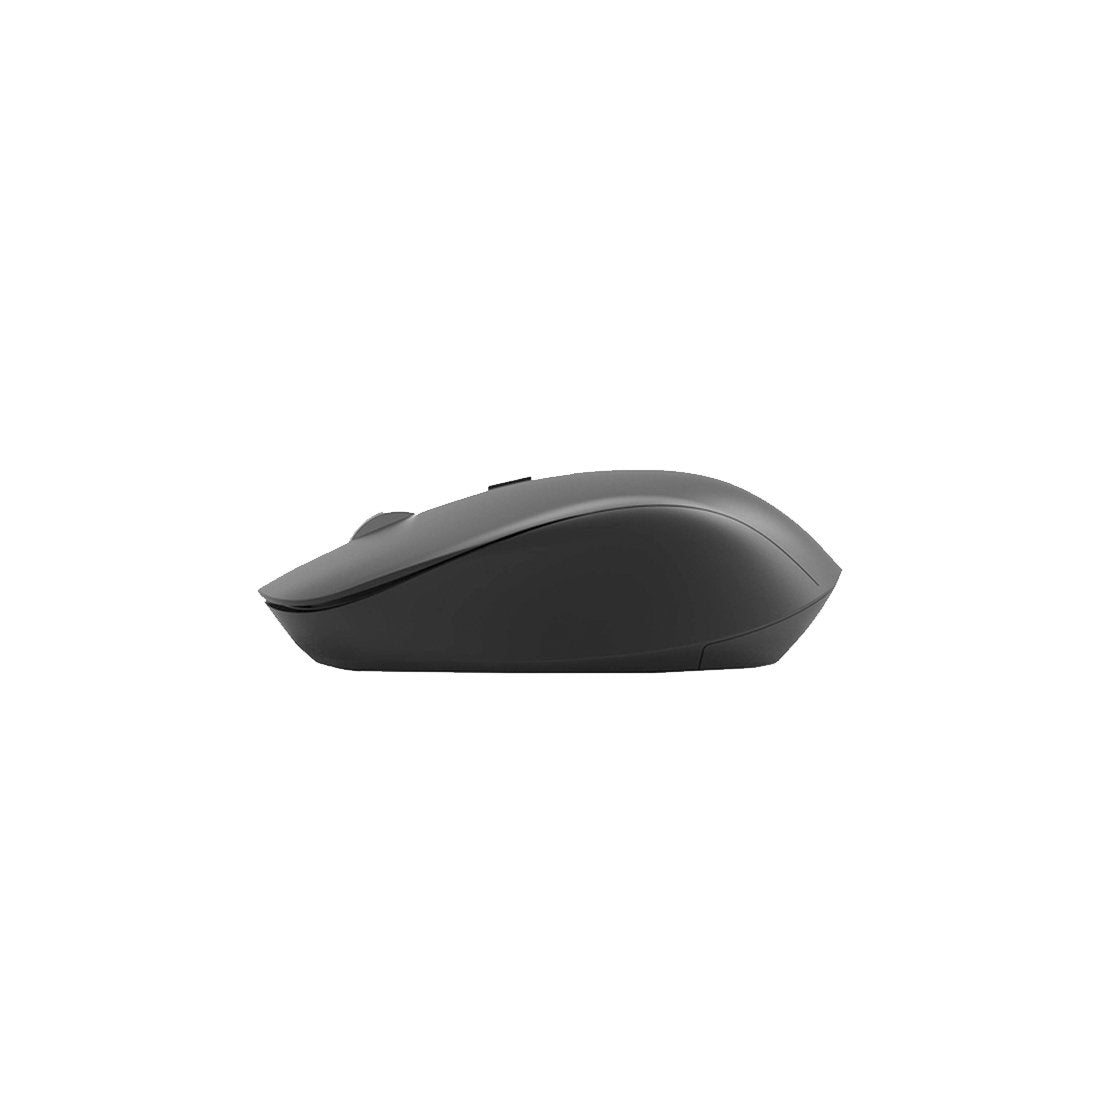 [RePacked] HP S1000 Plus Silent Optical Mouse with 1600 DPI and 2.4GHz Wireless Connection